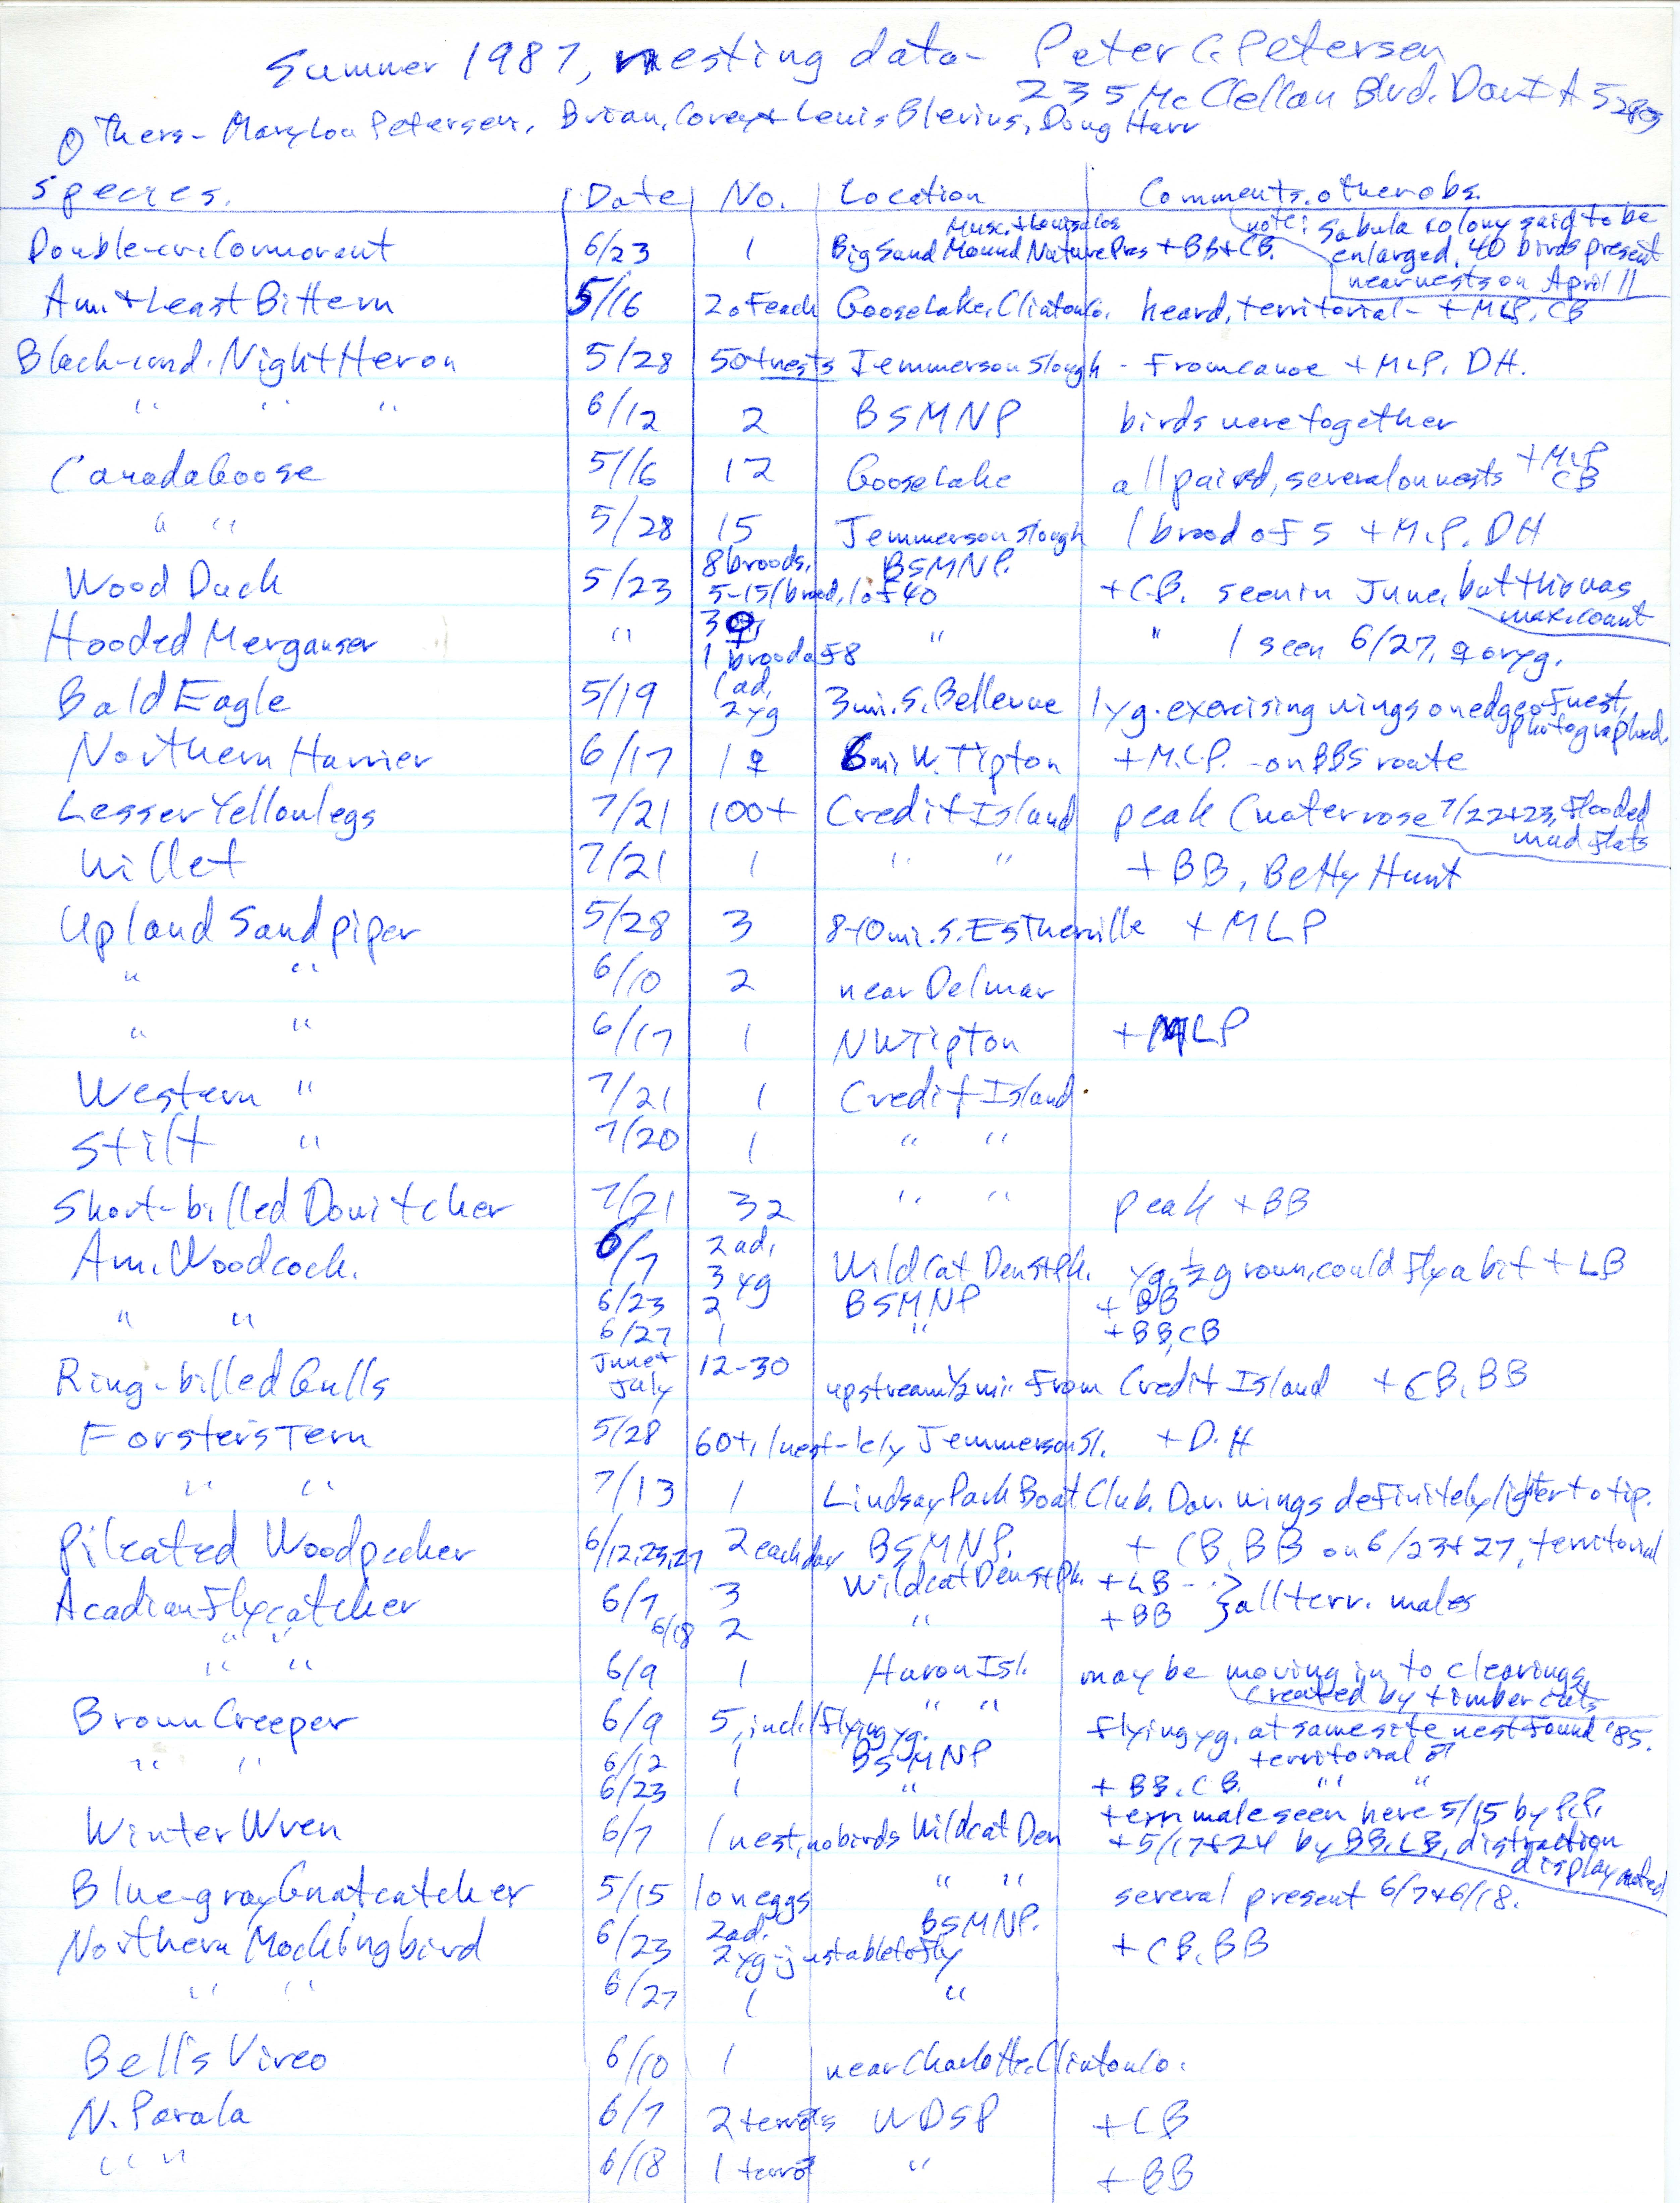 Field notes contributed by Peter C. Petersen, summer 1987